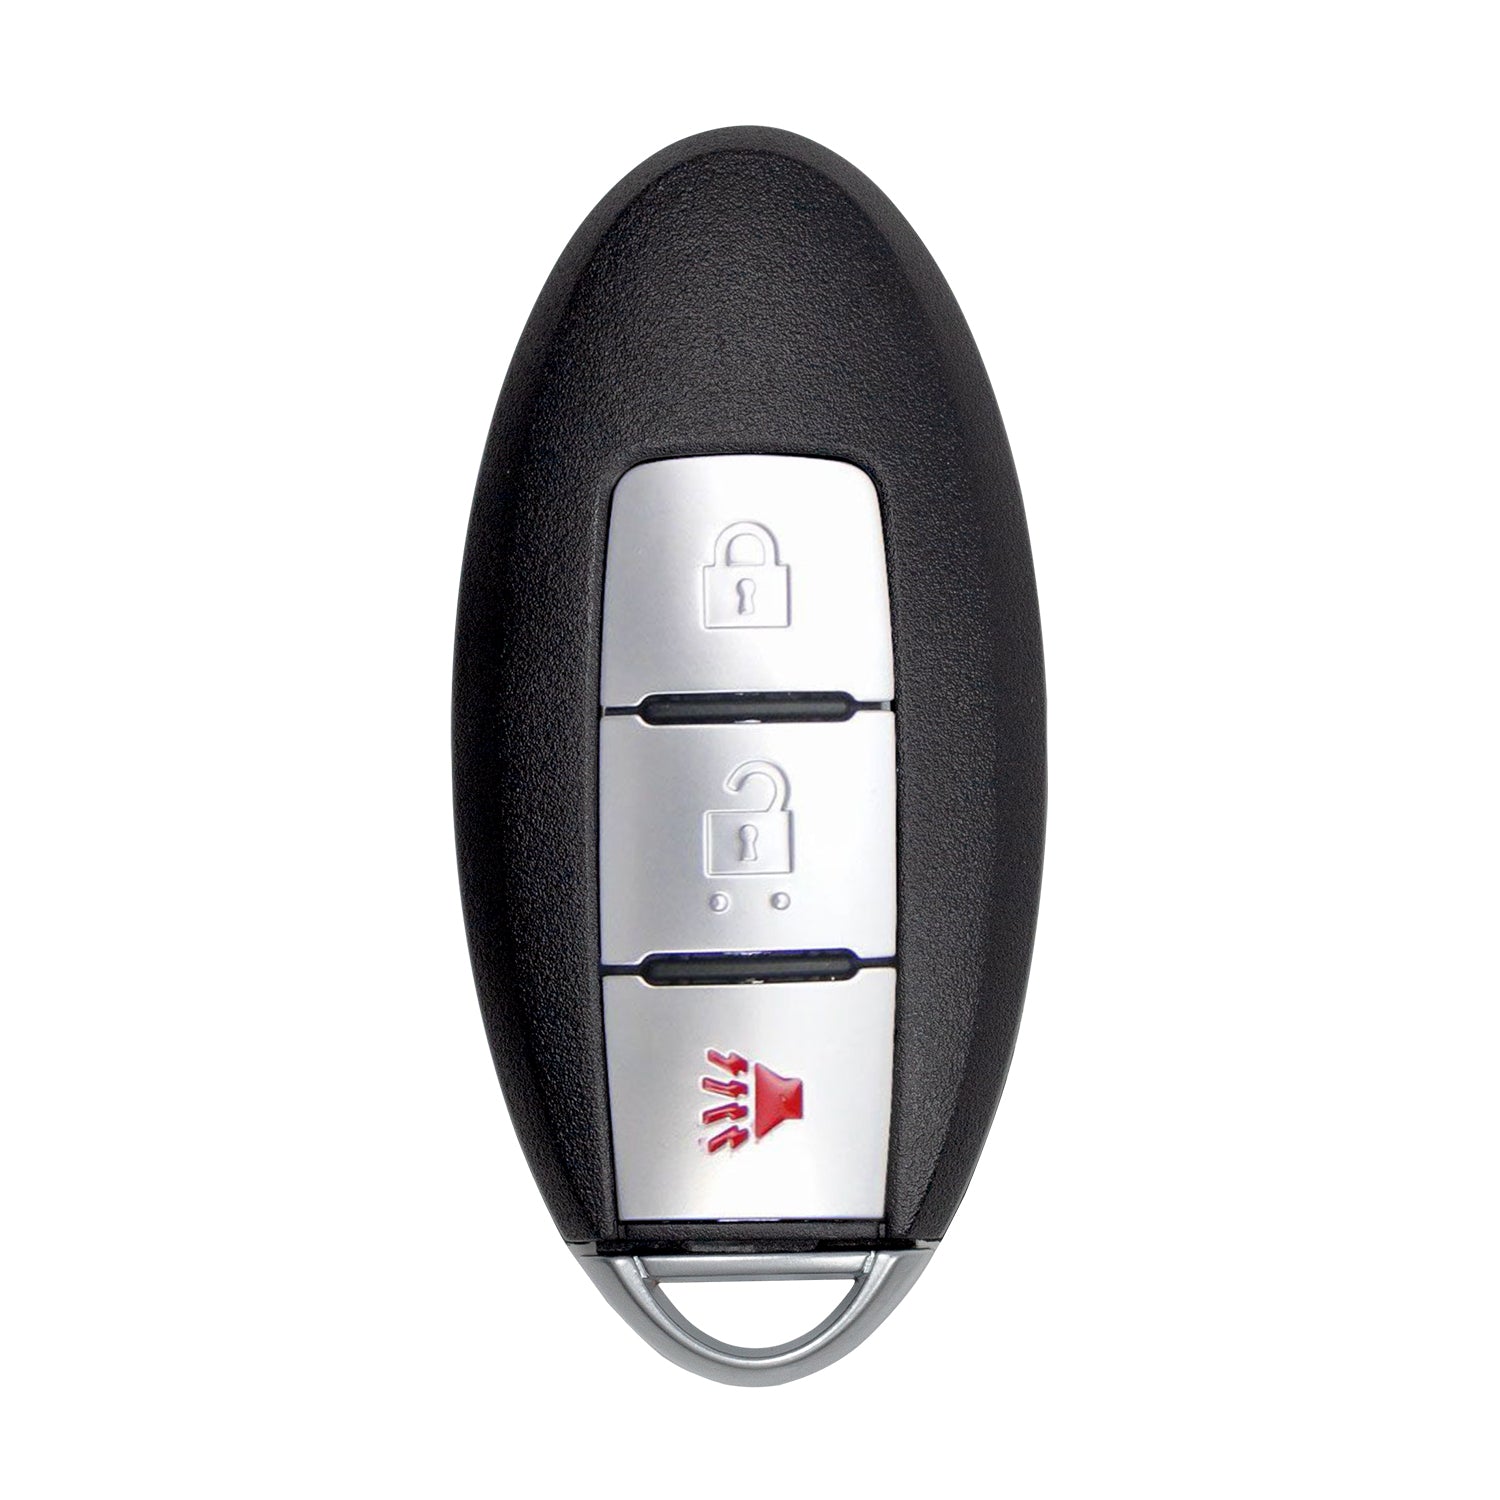 3 Button Proximity Smart Key Fob for Nissan Rogue 2014 2015 2016 2017 2018 KR5S180144106 S180144105 (433 MHz)